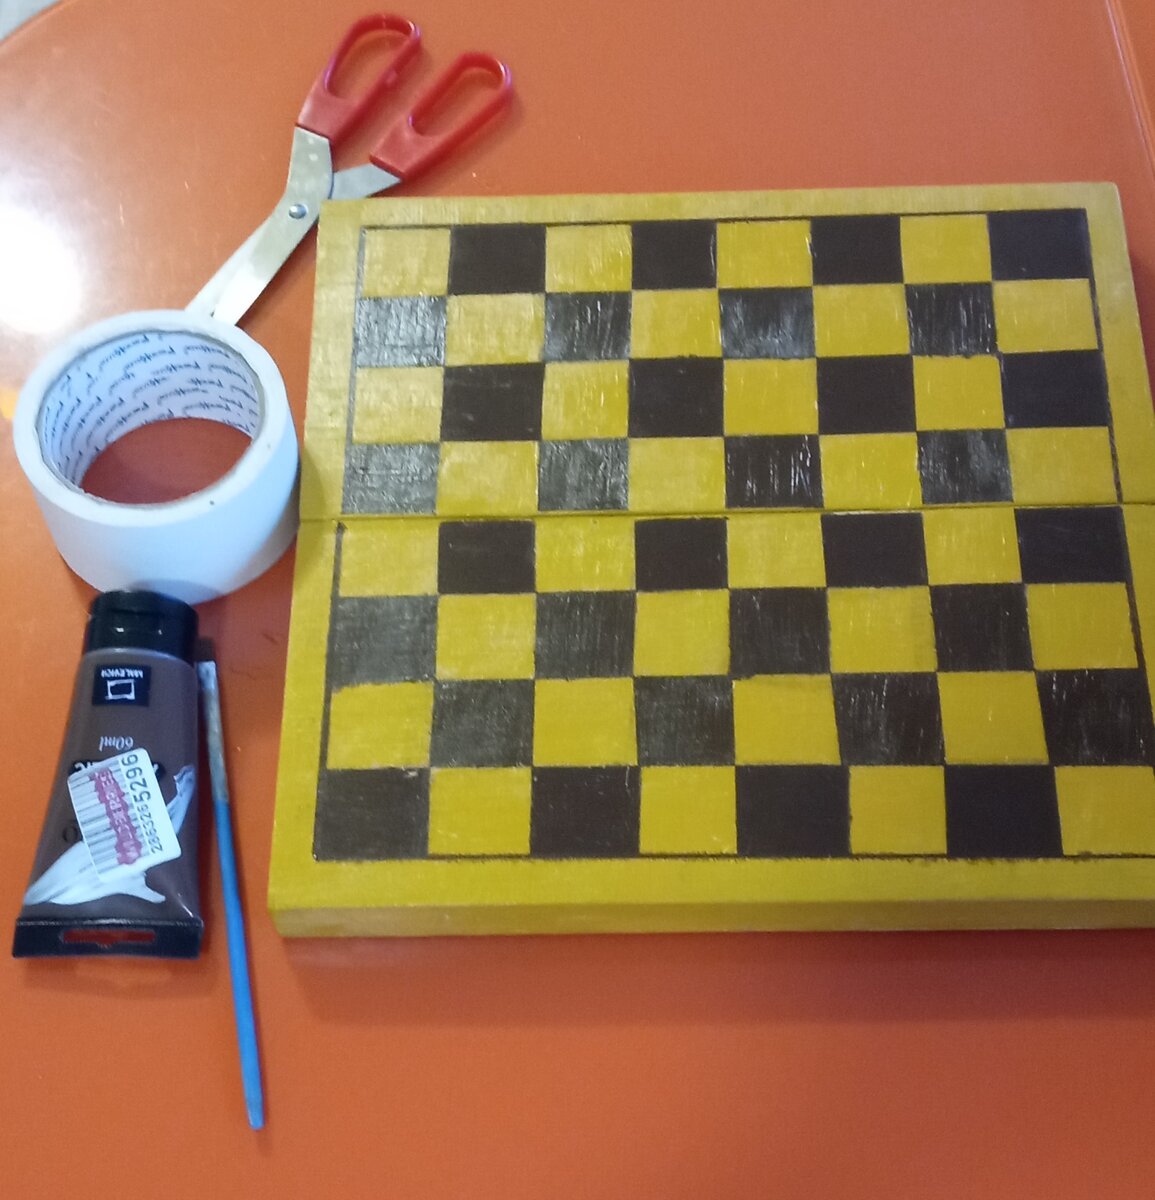 Egypt chess CNC carving